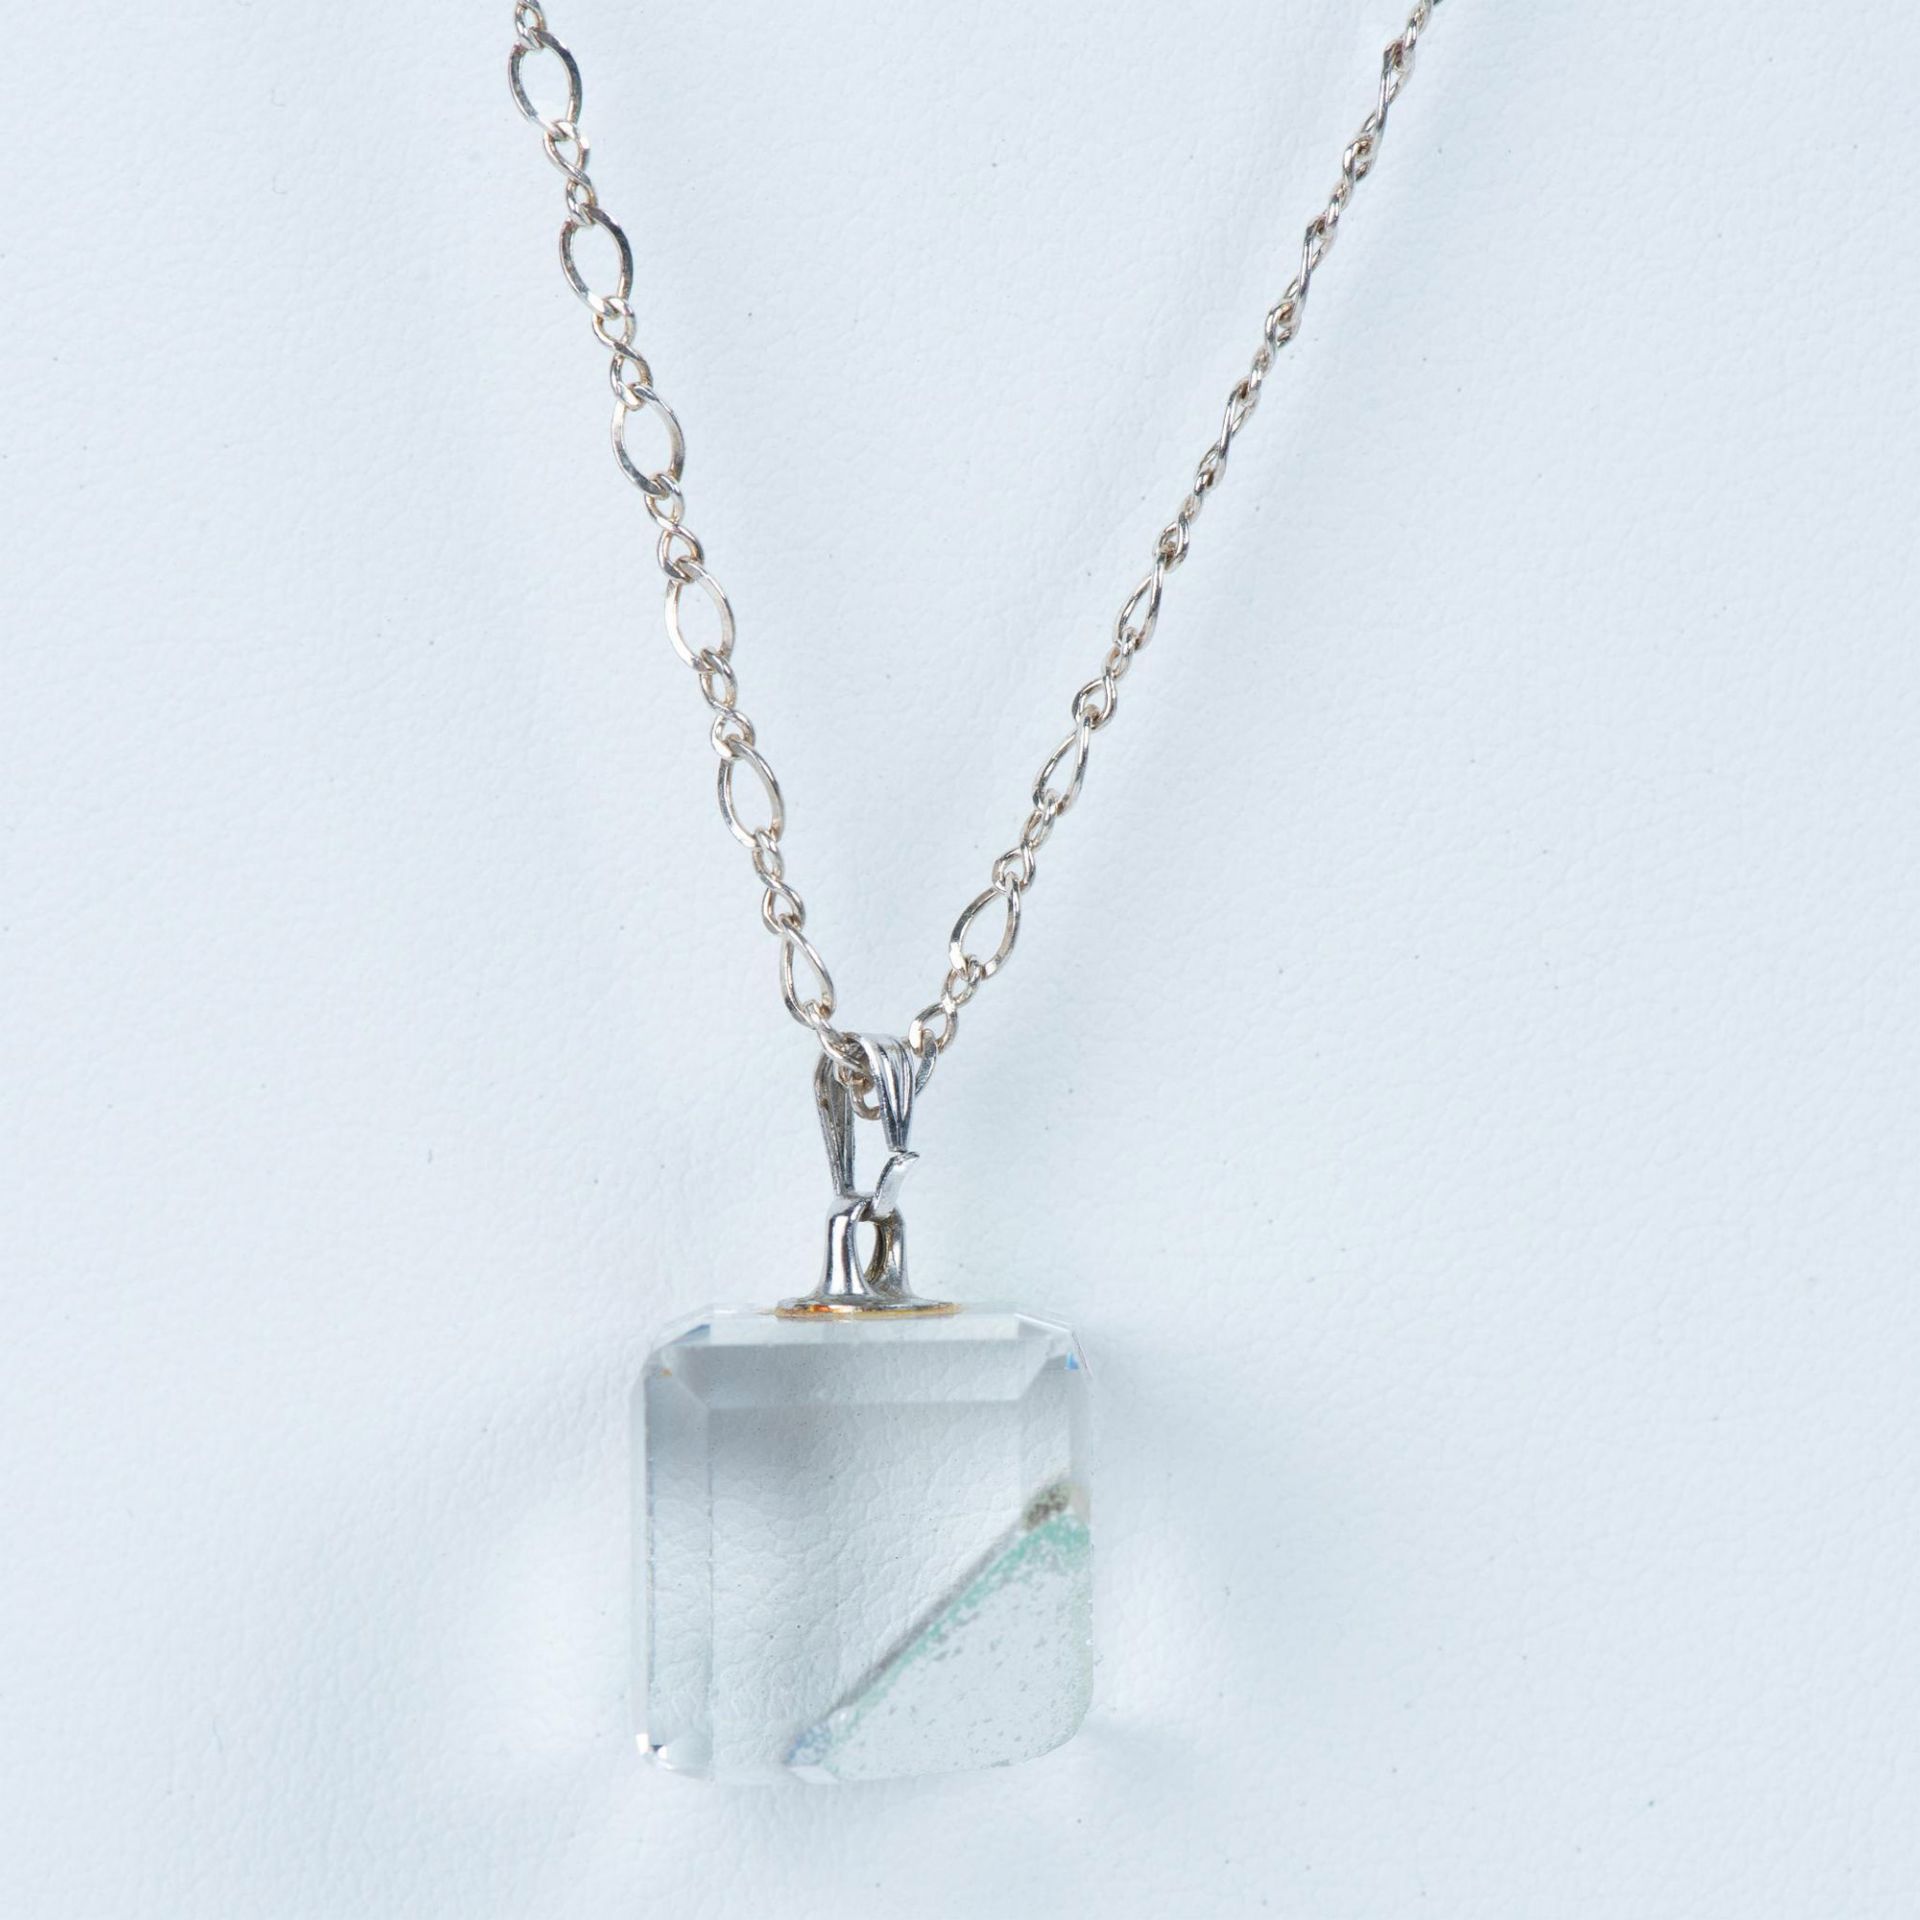 Crystal Pendant on Sterling Silver Chain - Image 4 of 4